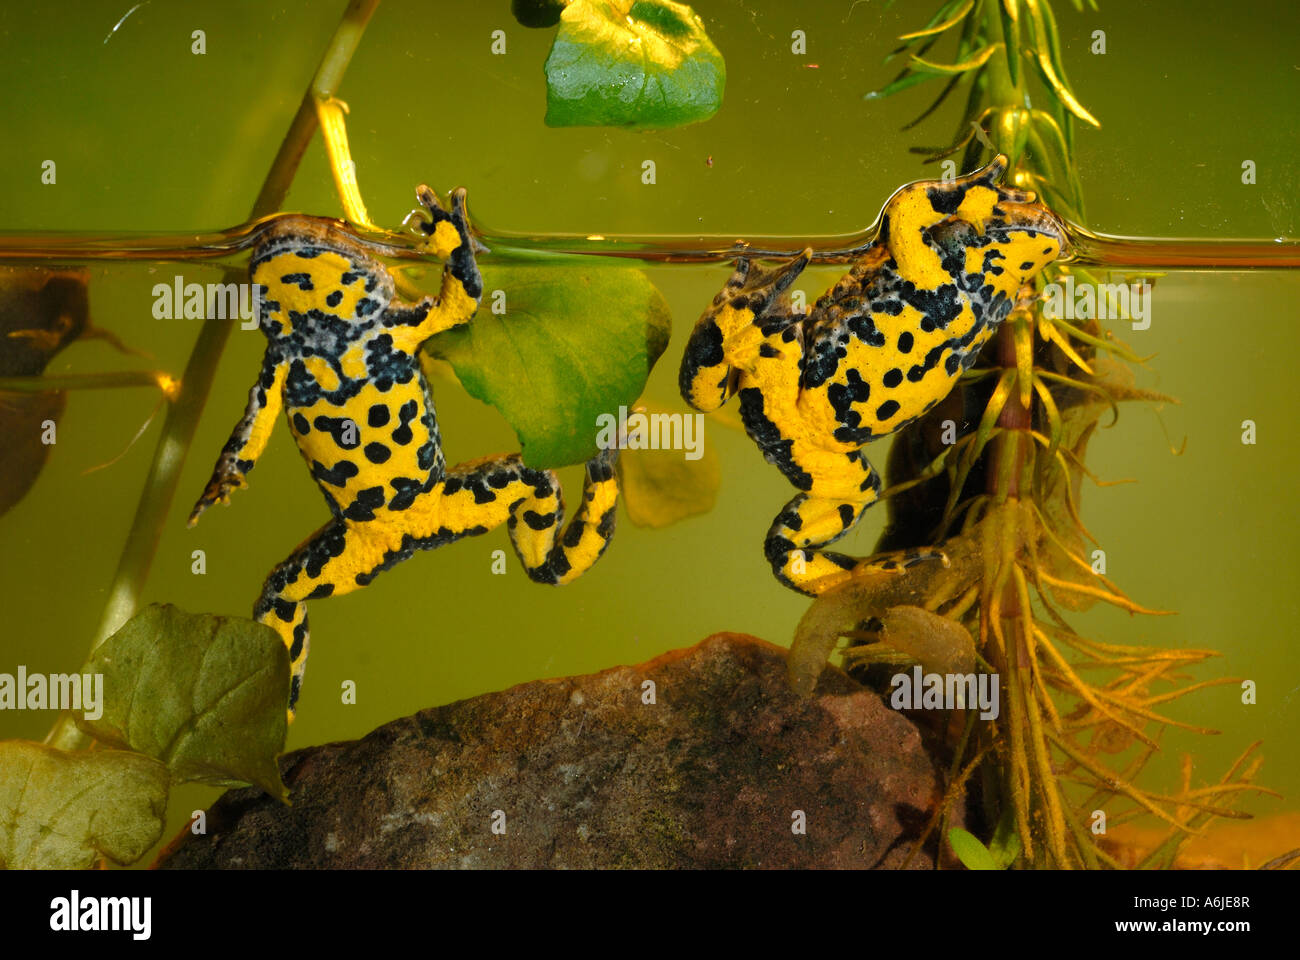 Yellow-bellied Toad, Yellowbelly Toad, Variegated Fire Toad (Bombina variegata). Two individuals on the side of an aquarium Stock Photo